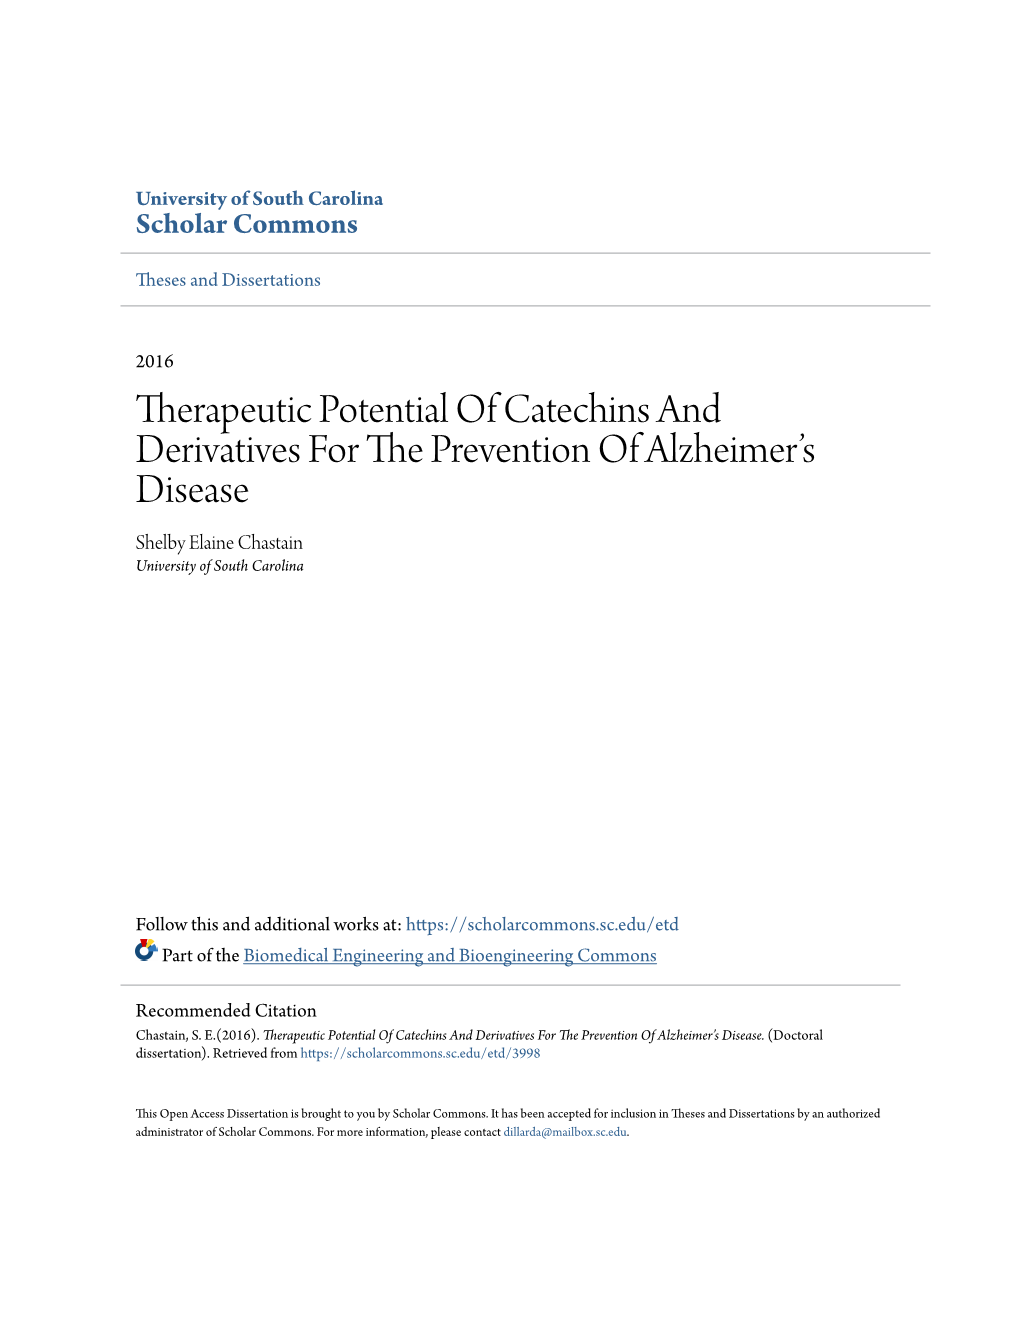 Therapeutic Potential of Catechins and Derivatives for the Prevention of Alzheimer’S Disease